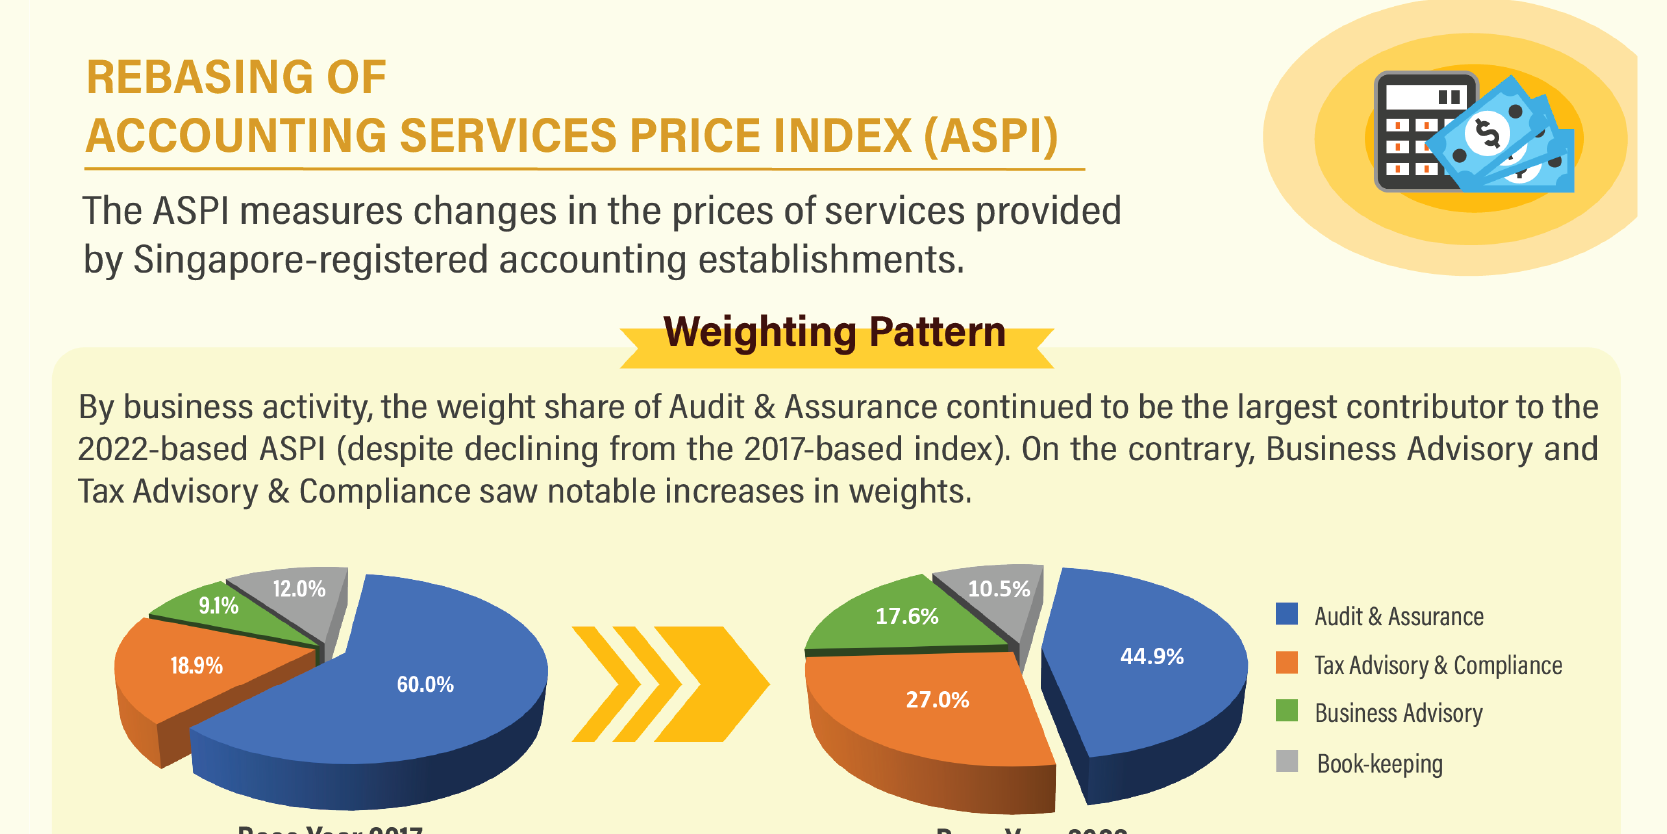 Rebasing of Accounting Services Price Index